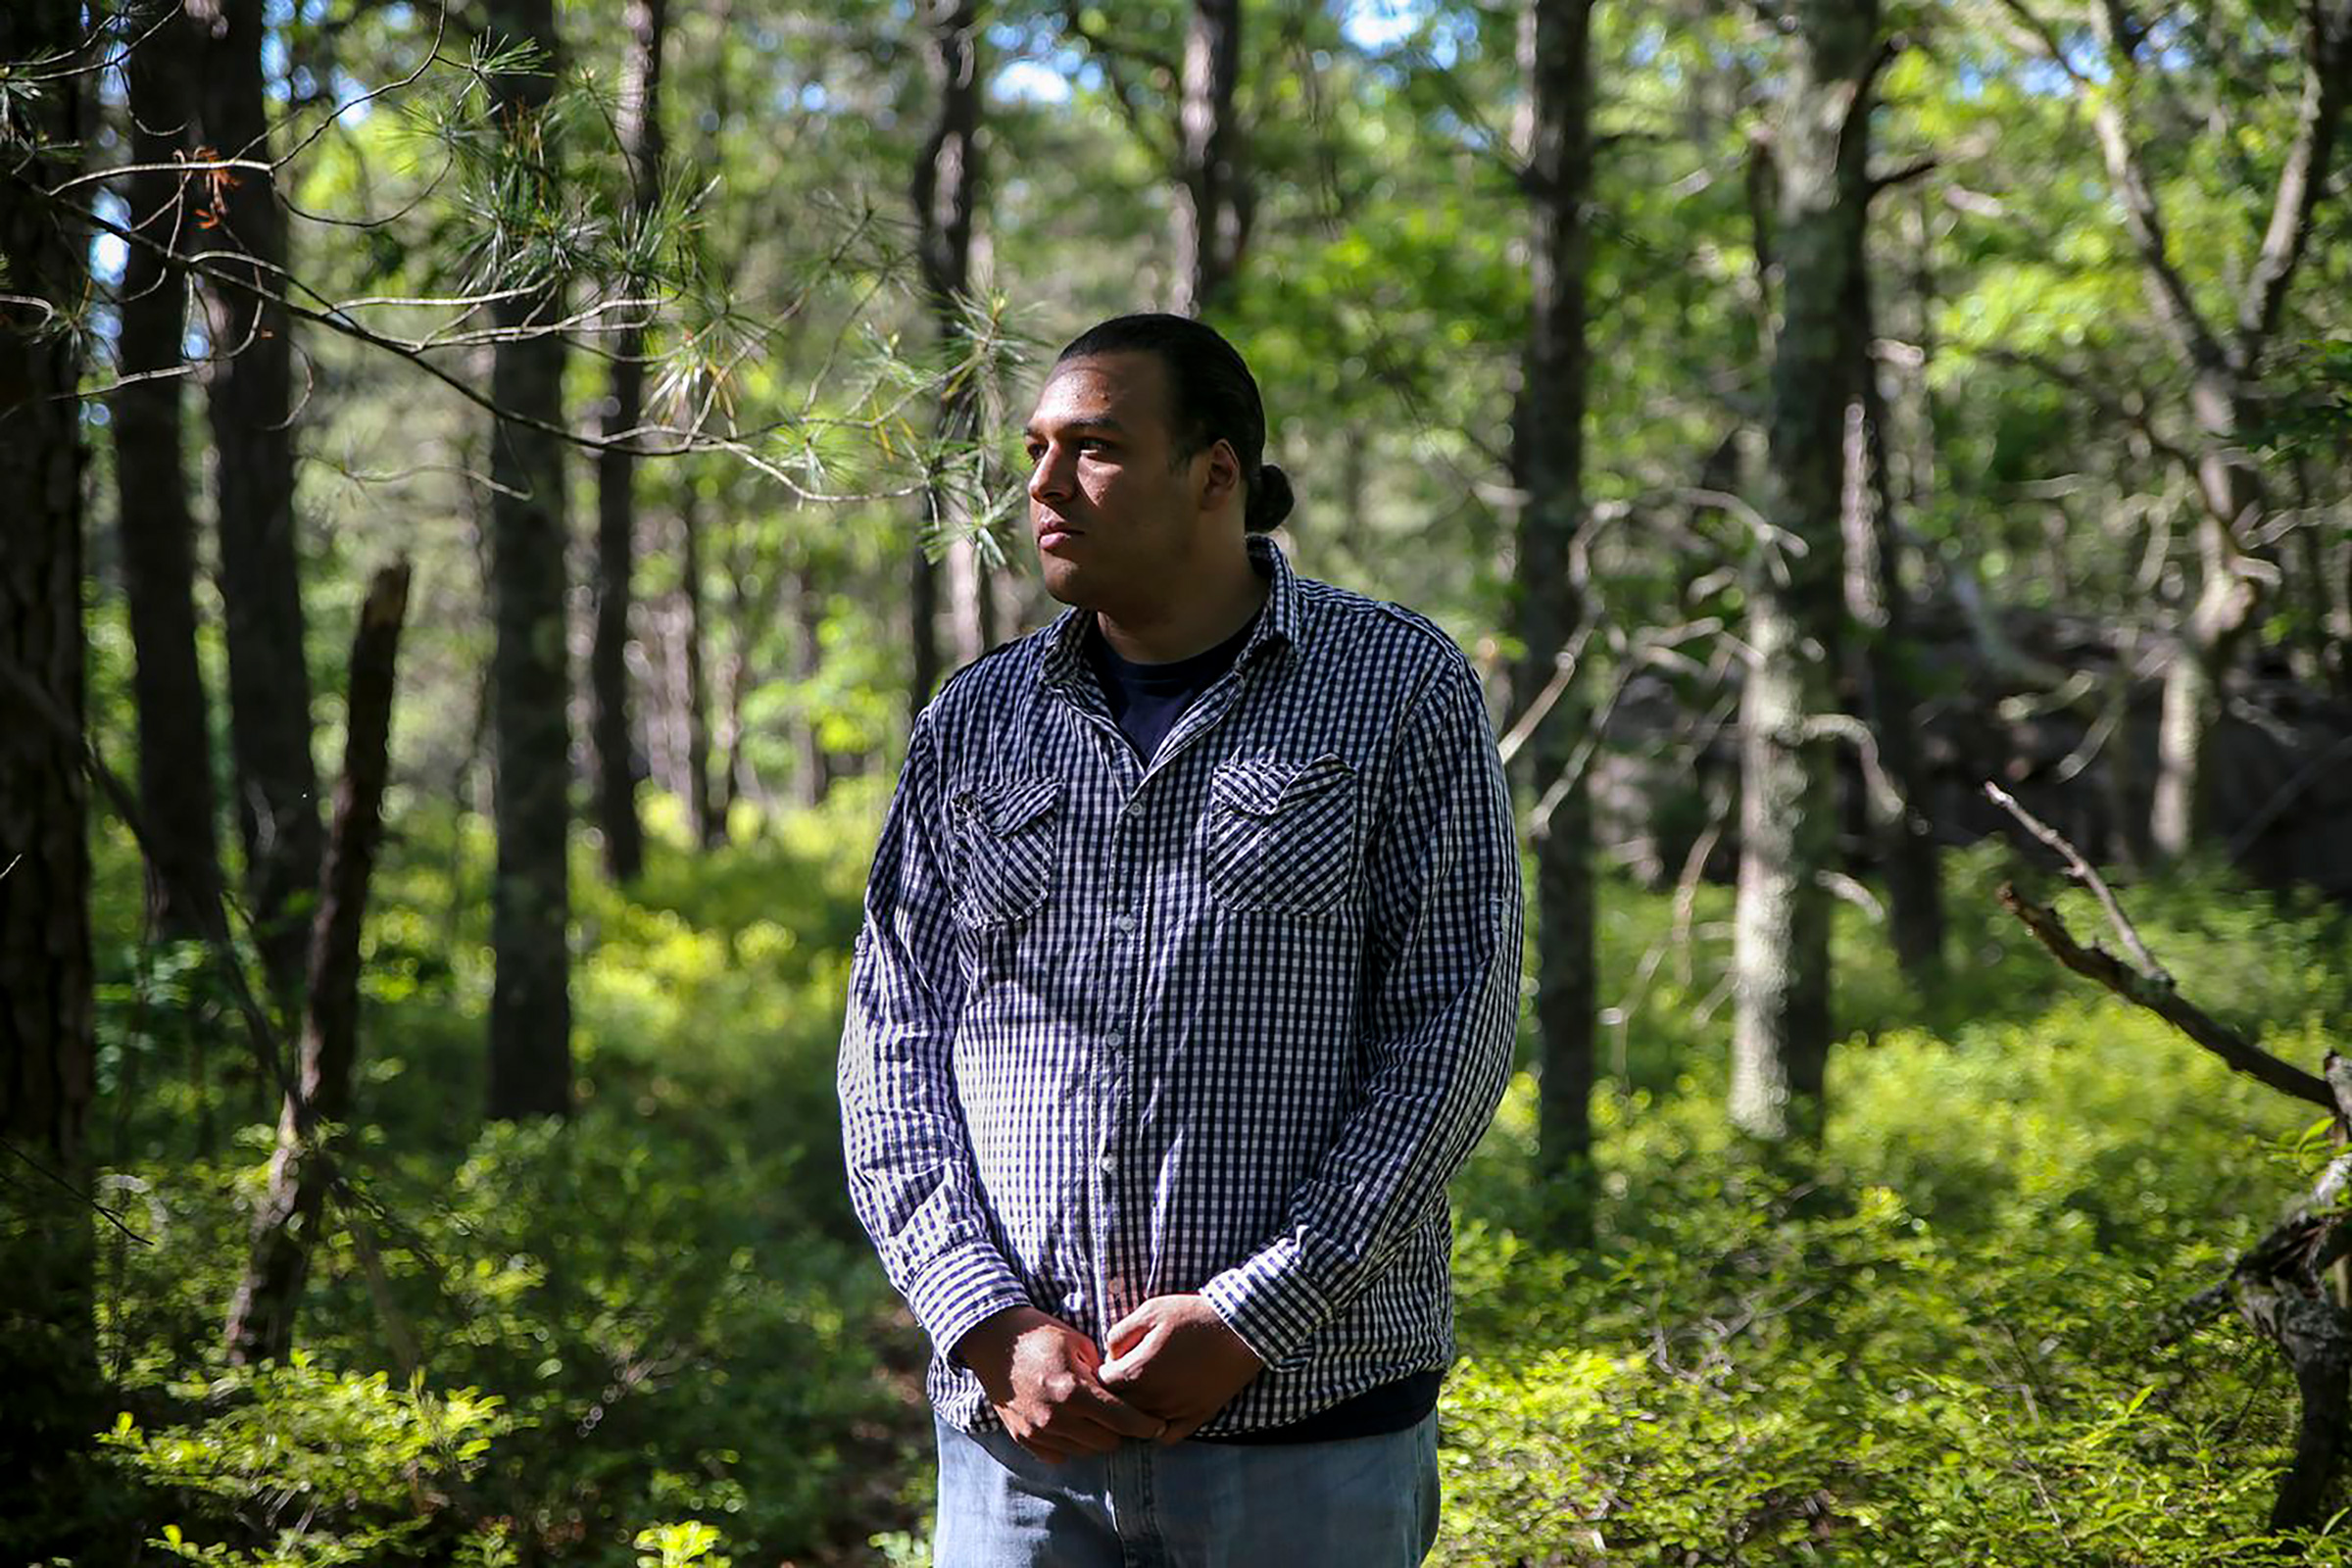 “I personally think that it’s just another reminder of all the horrible things that this nation has done to not only us, but all native people,” the Chairman of the Mashpee Wampanoag tribe, 29 year-old Brian Weeden tells TIME of that “first” Thanksgiving, adding that he and his tribe feel largely forgotten. (Christiana Botic—Boston Globe)